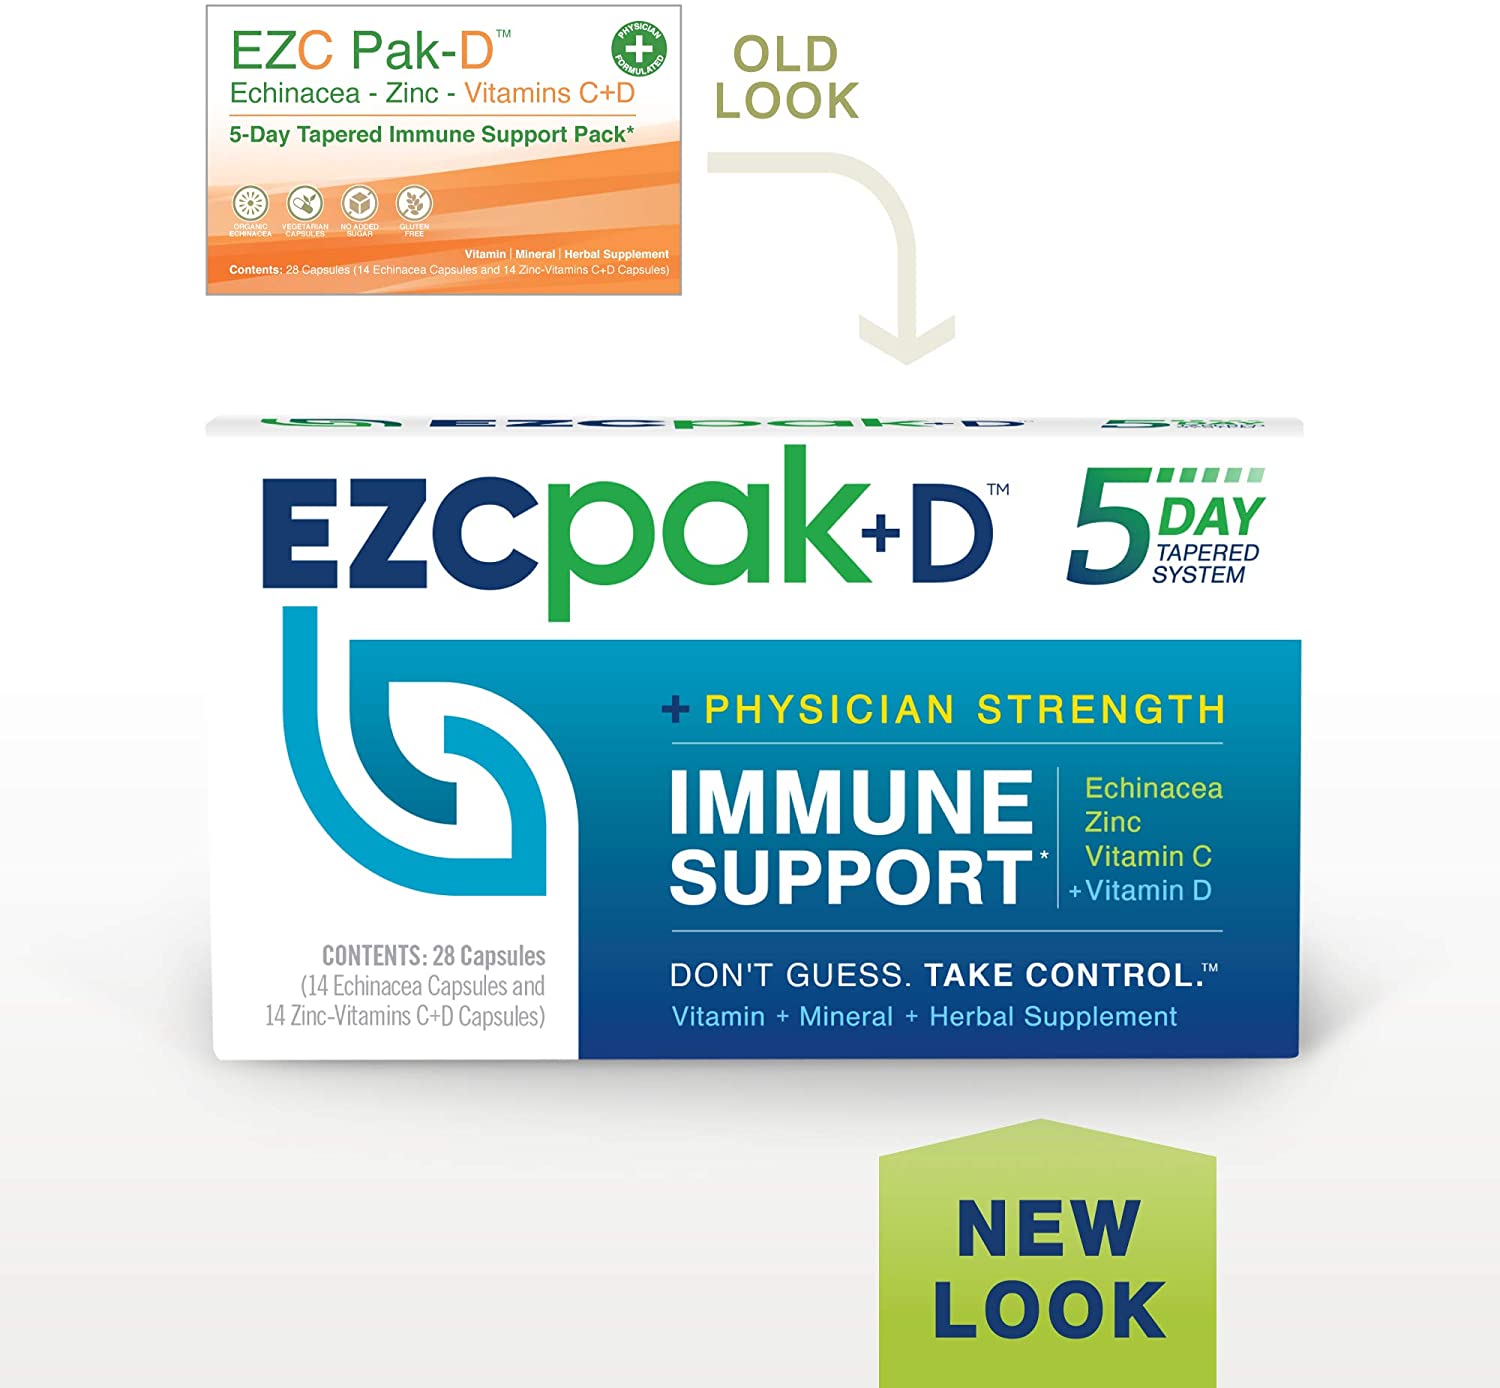 EZC Pak+D 5-Day Tapered Immune Support Pack Echinacea Zinc Vitamin C Vitamin D Old packaging versus New packaging